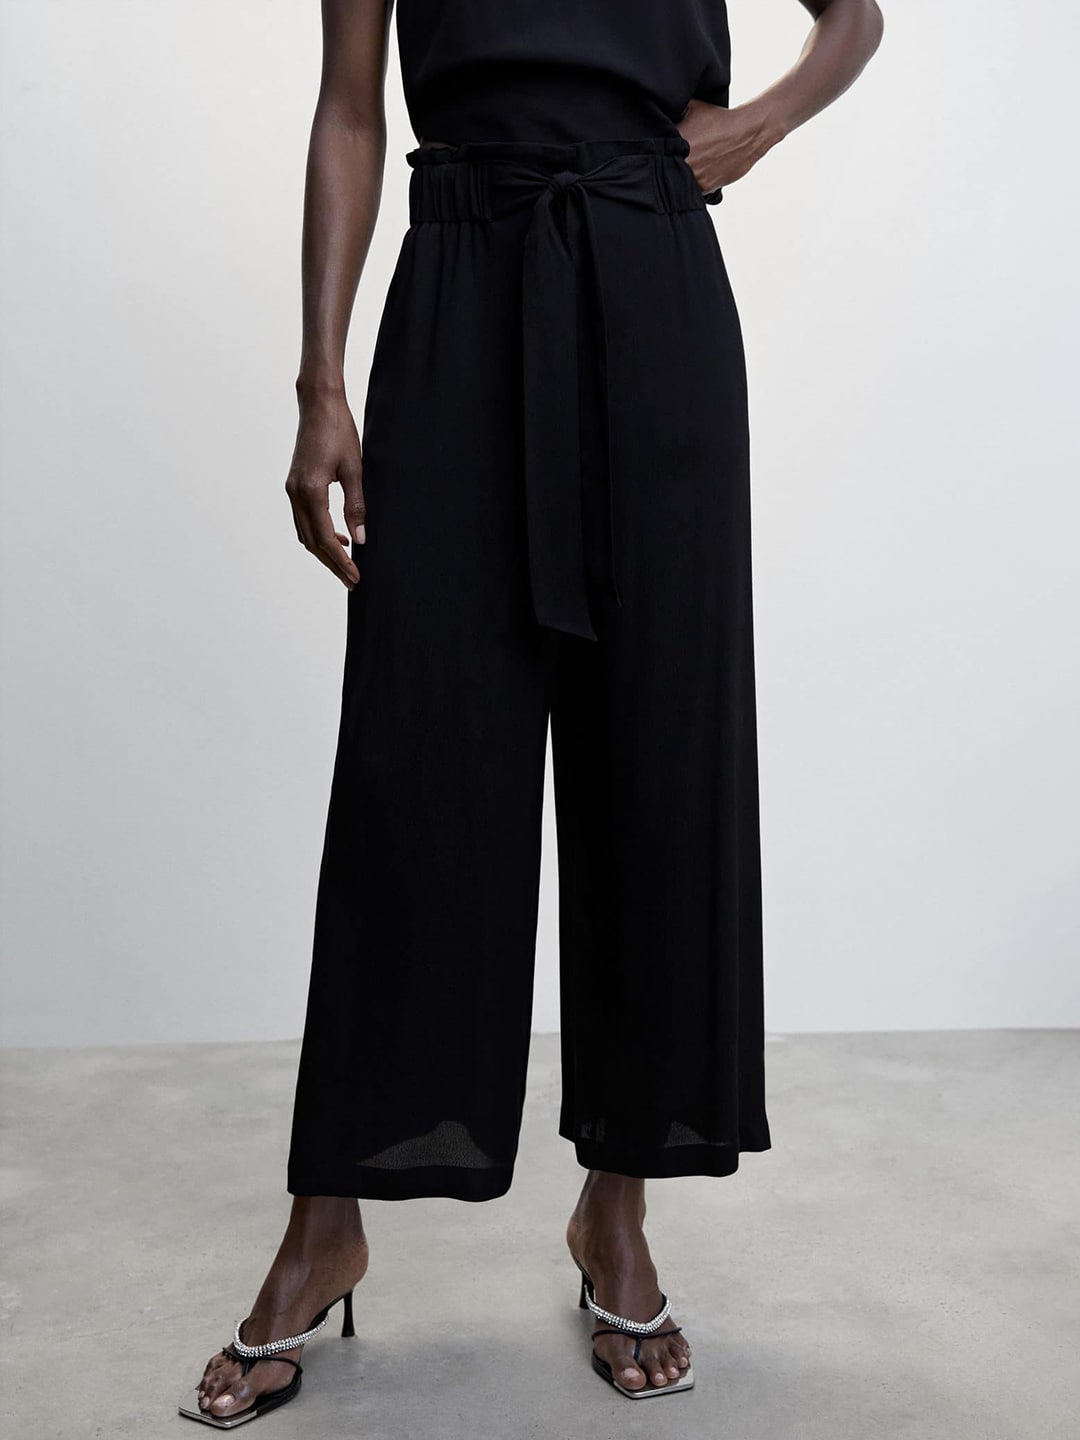 MANGO Women Black Pleated Culottes Trousers Price in India